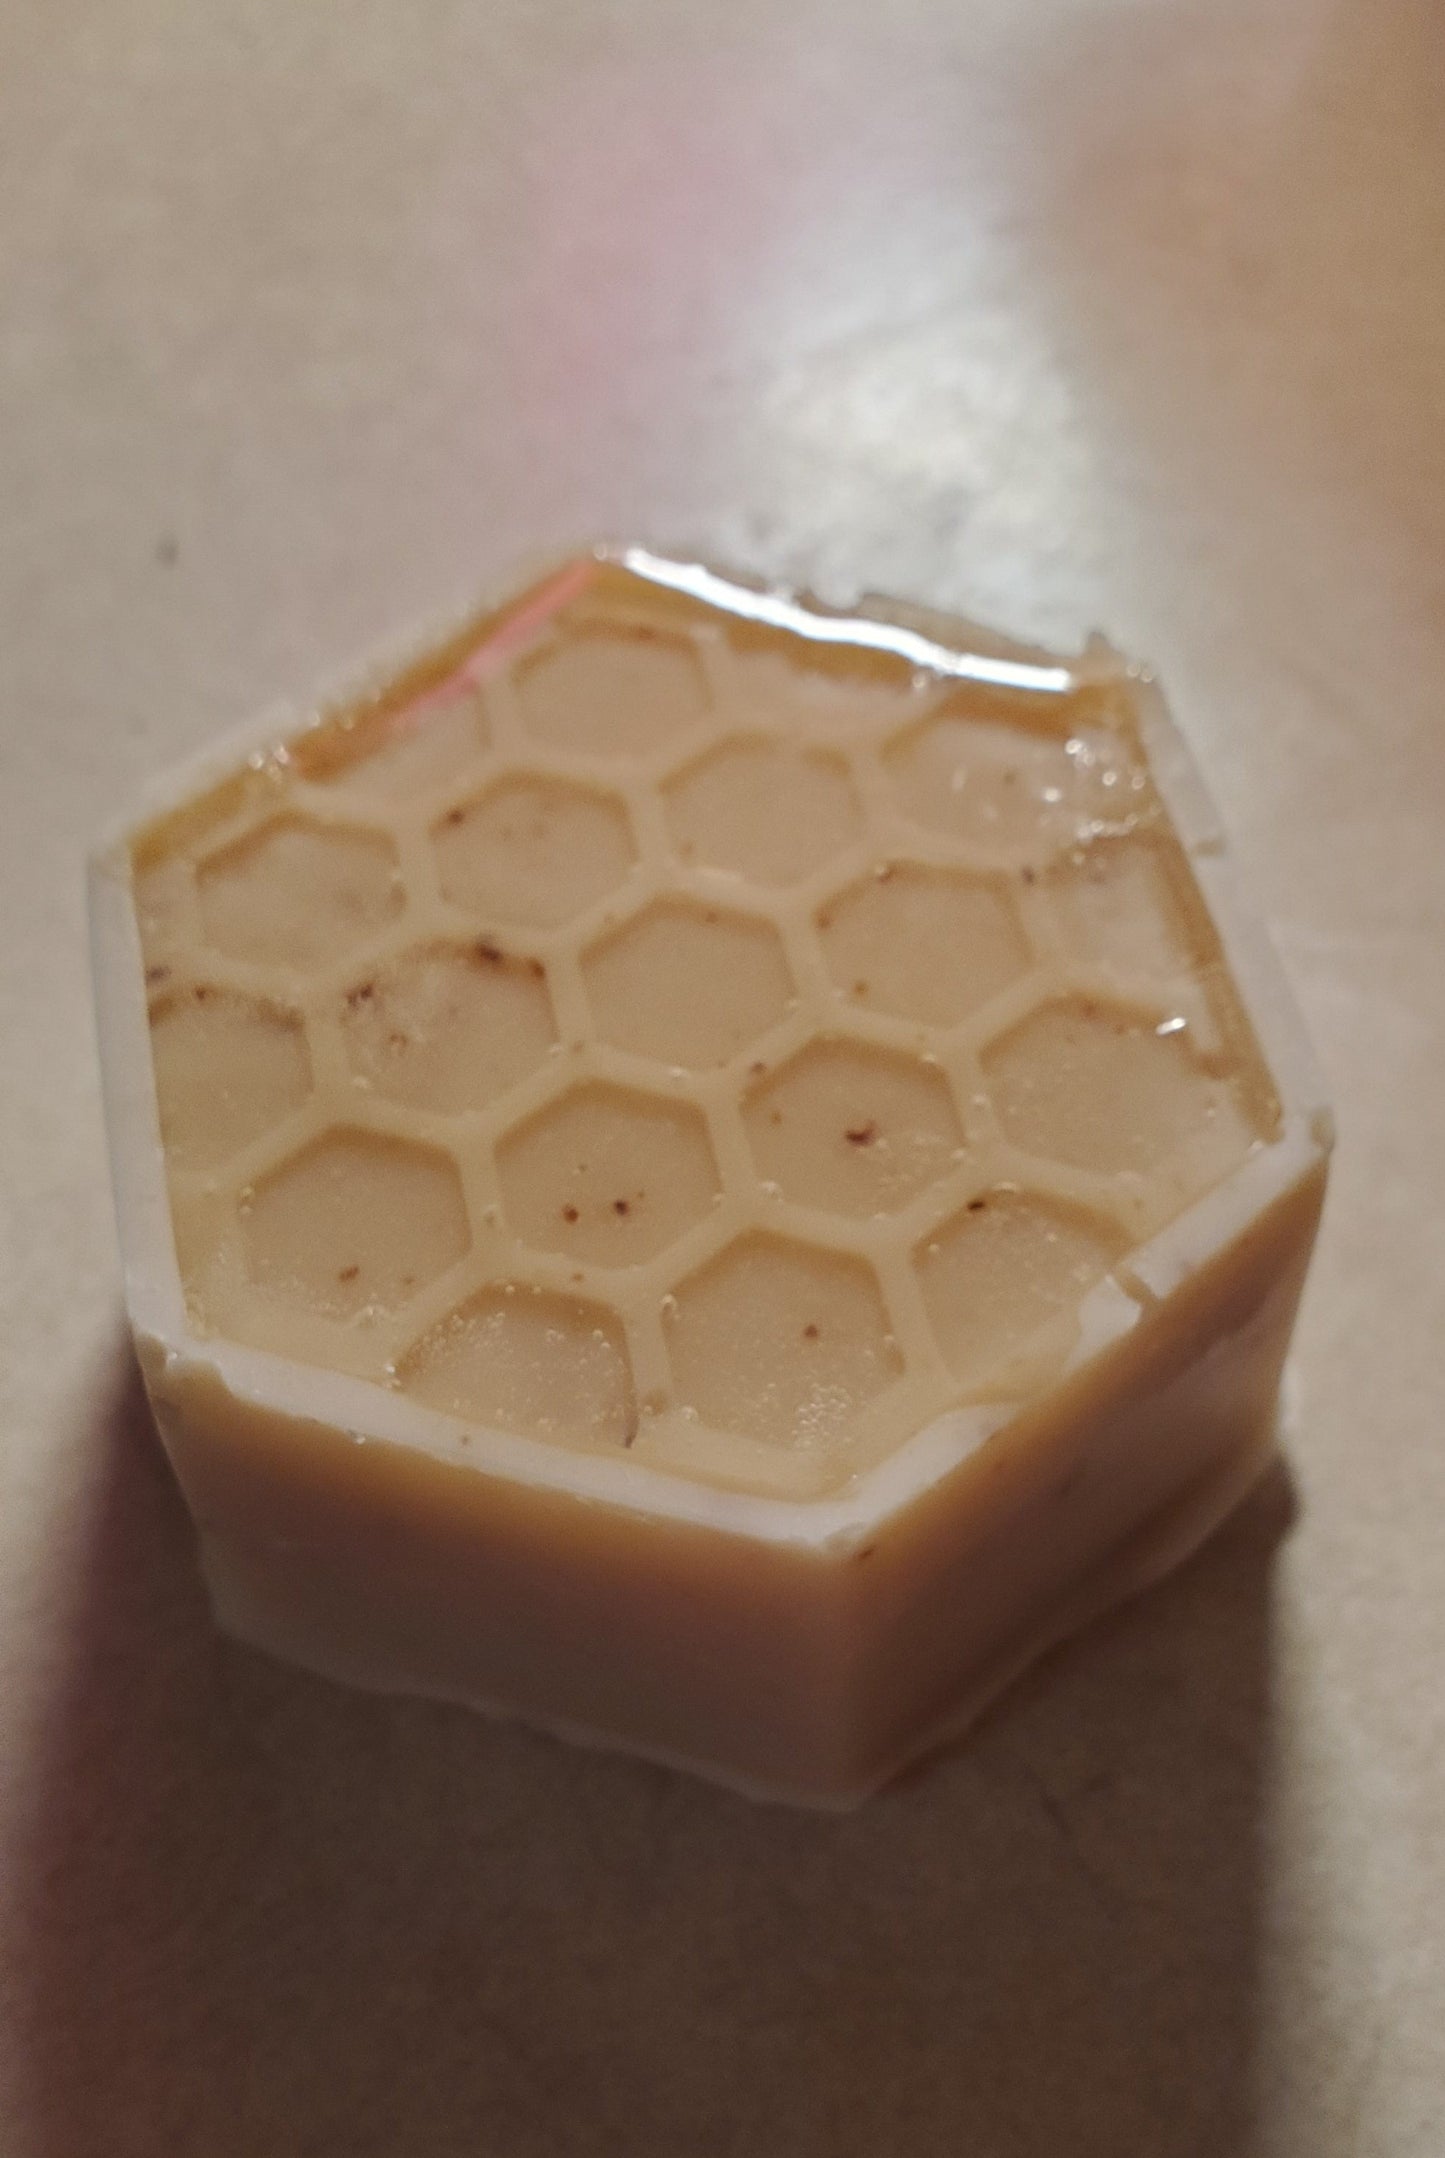 Bee Happy honeycomb edition shown with "honey" topped hexagon shape.